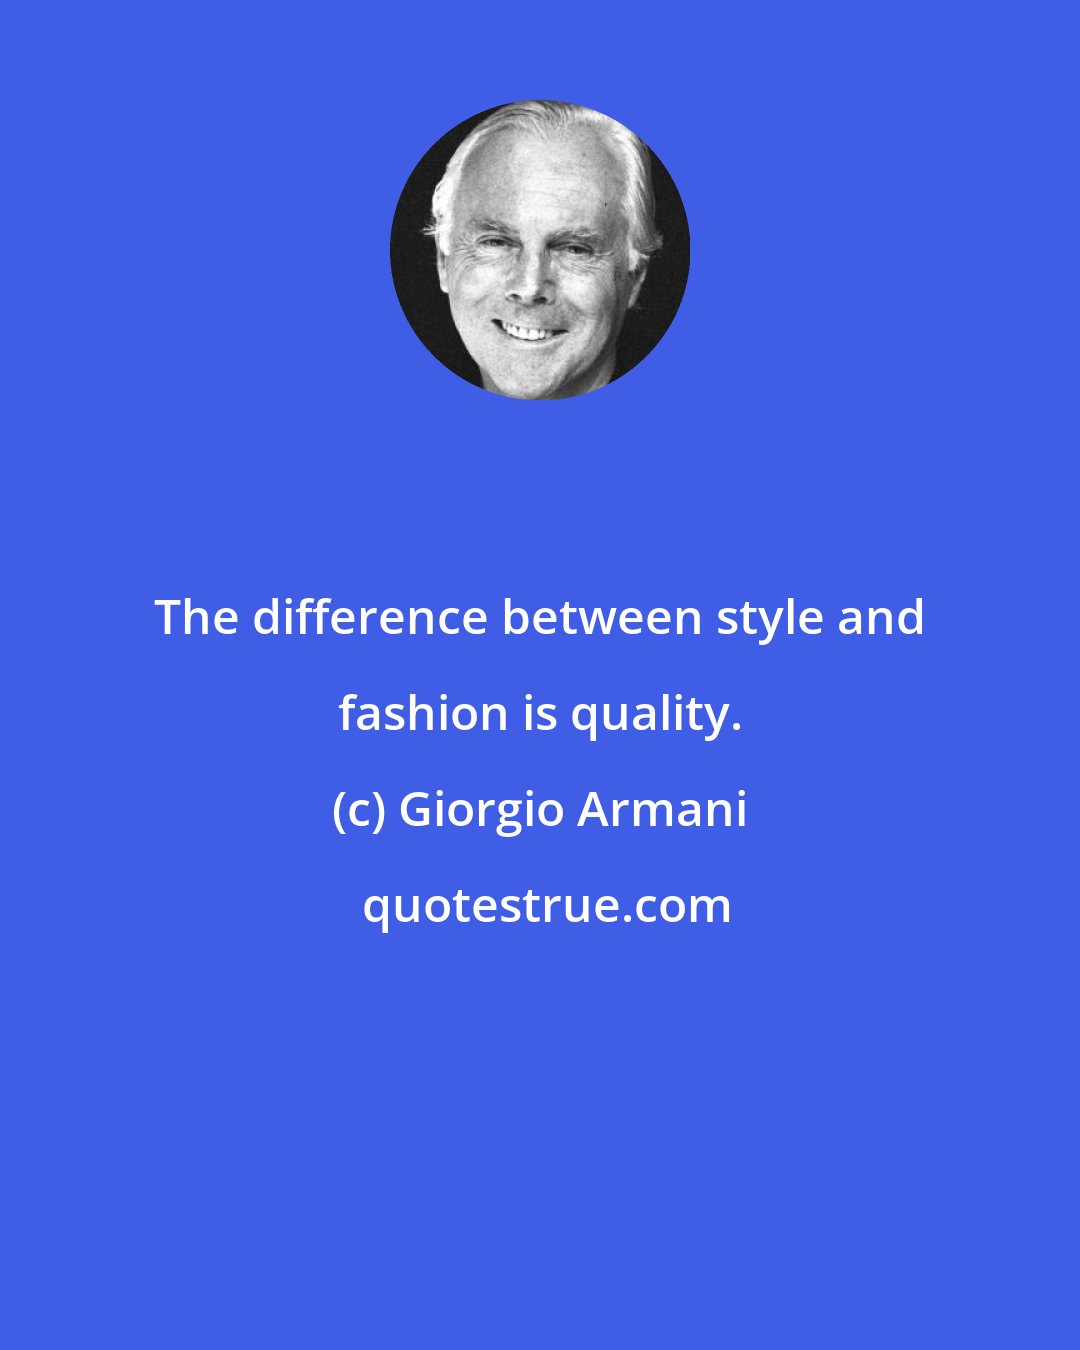 Giorgio Armani: The difference between style and fashion is quality.